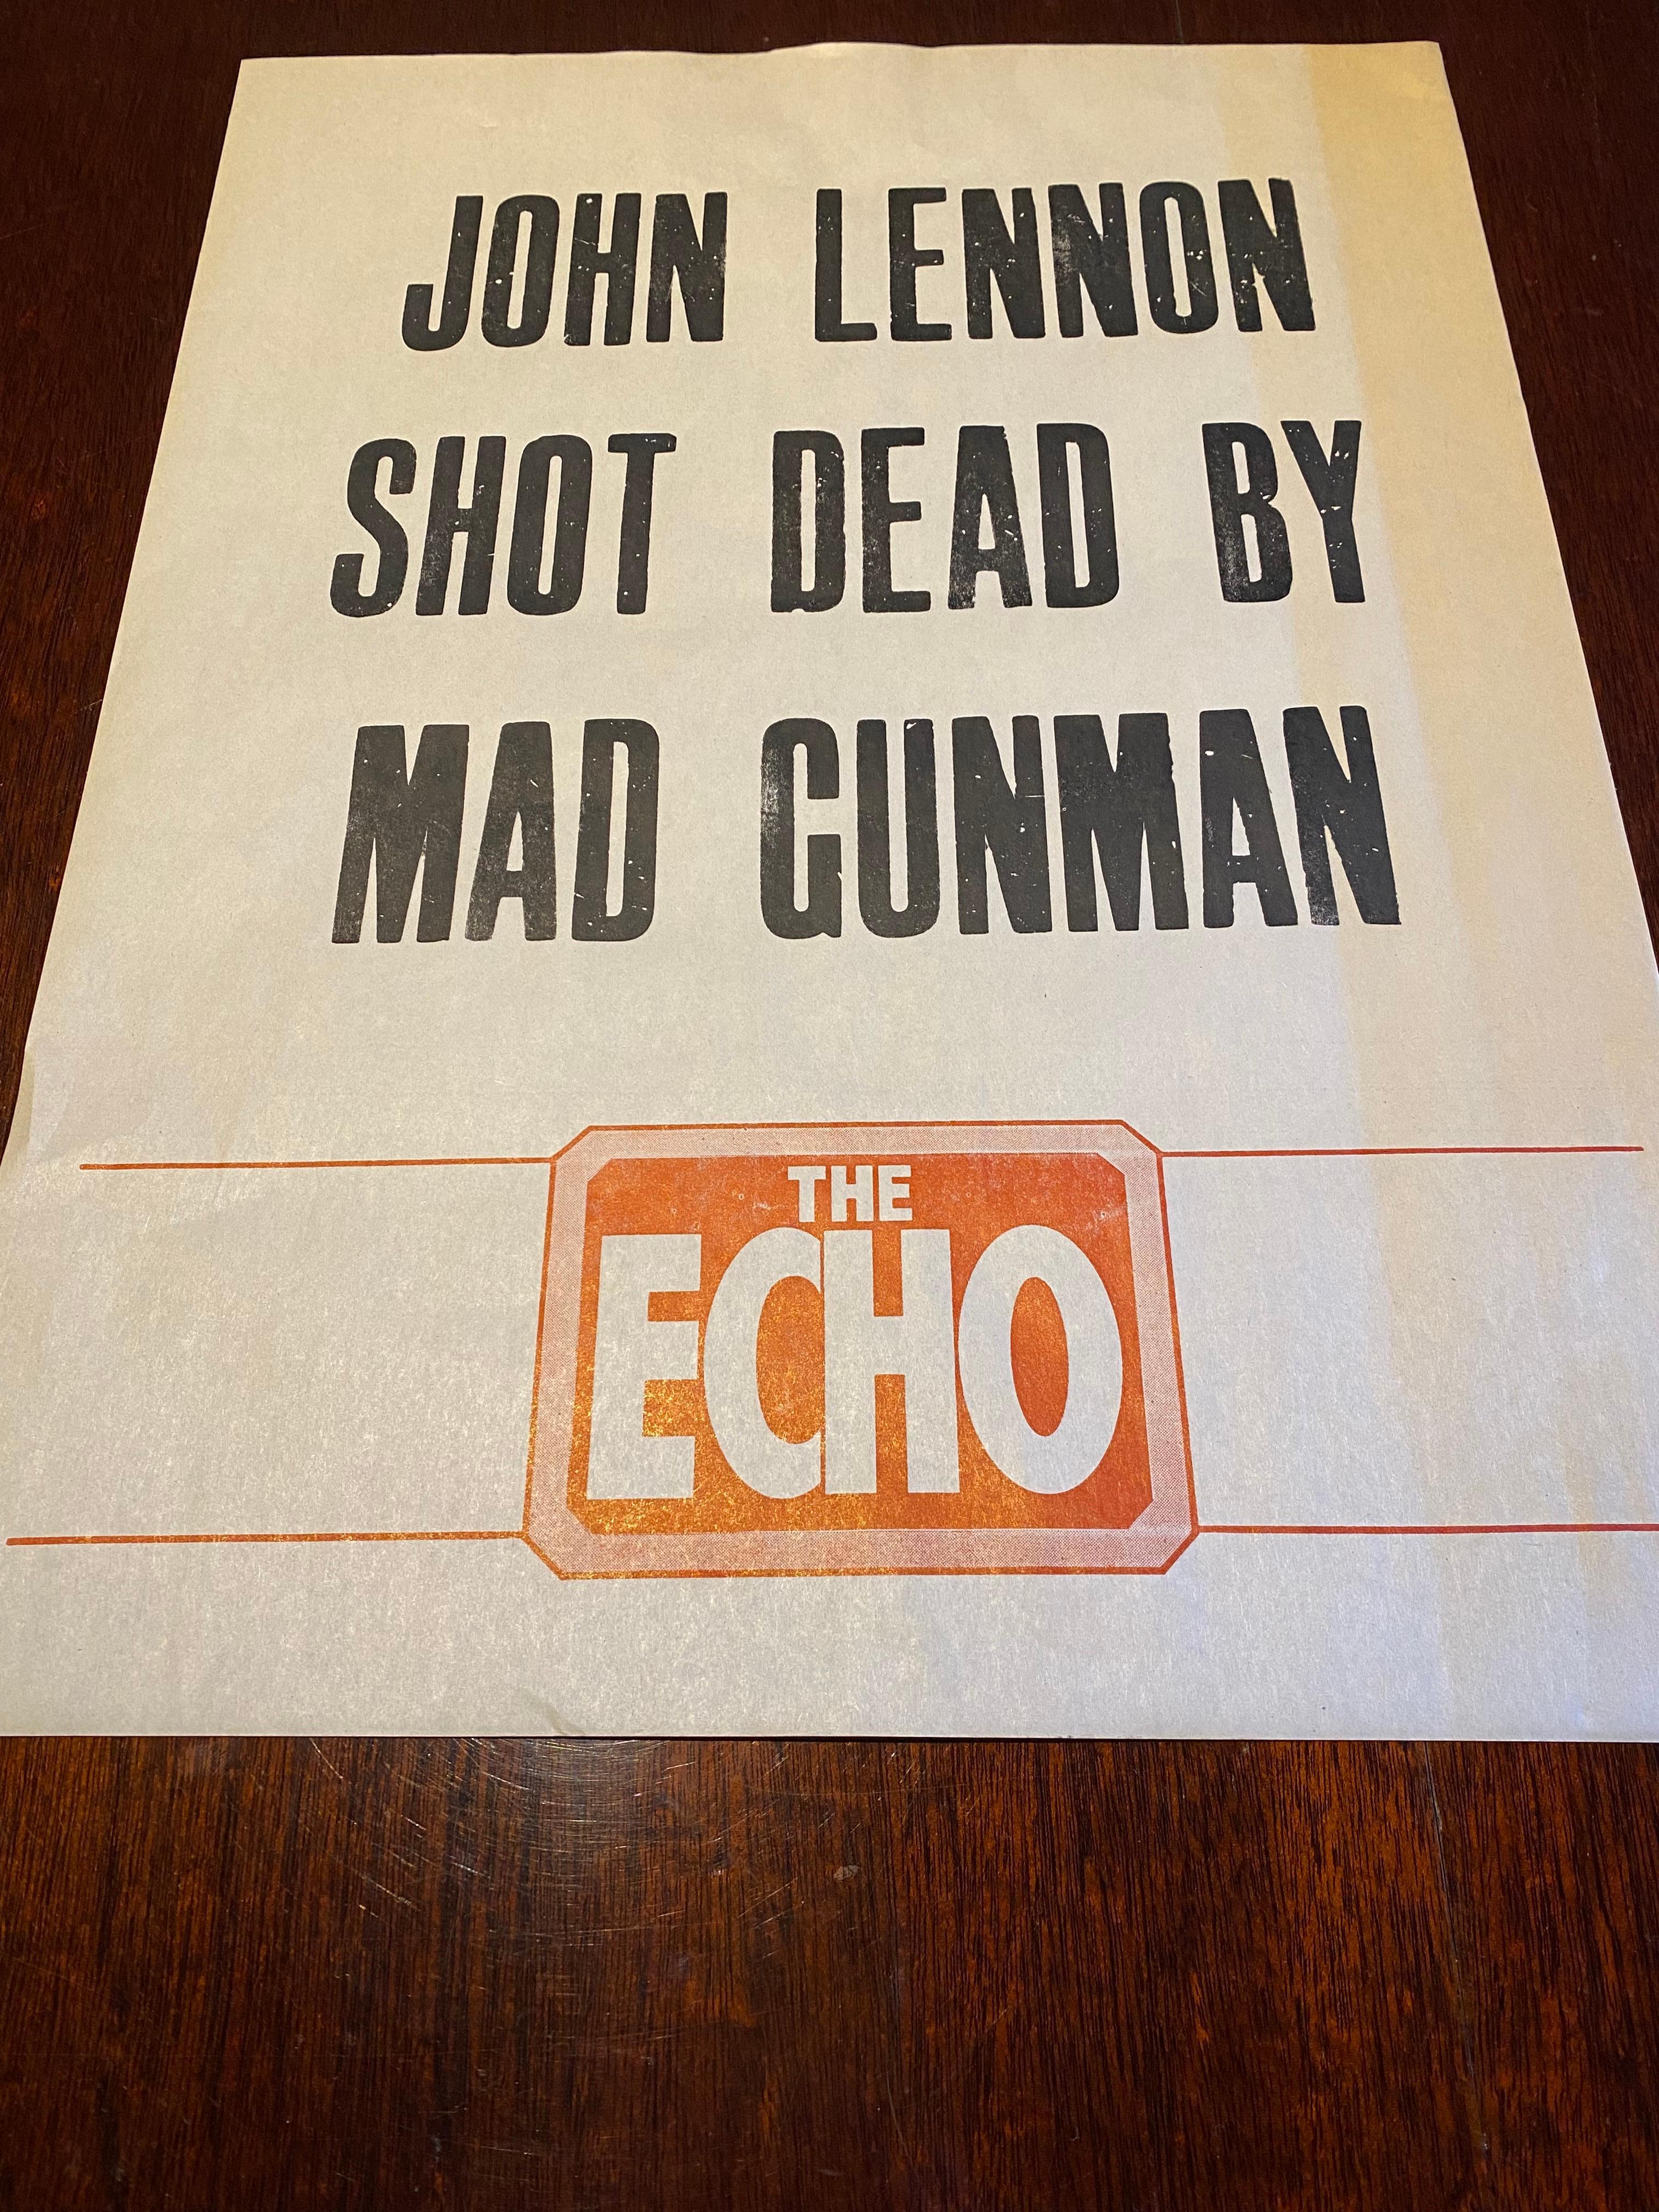 A very rare and original billboard poster from the Liverpool Echo announcing the death of John Lennon in 1980.

Very good condition. Some slight fading to one edge probably chaises by the sun. No folds, very minor creasing to the top and bottom edge